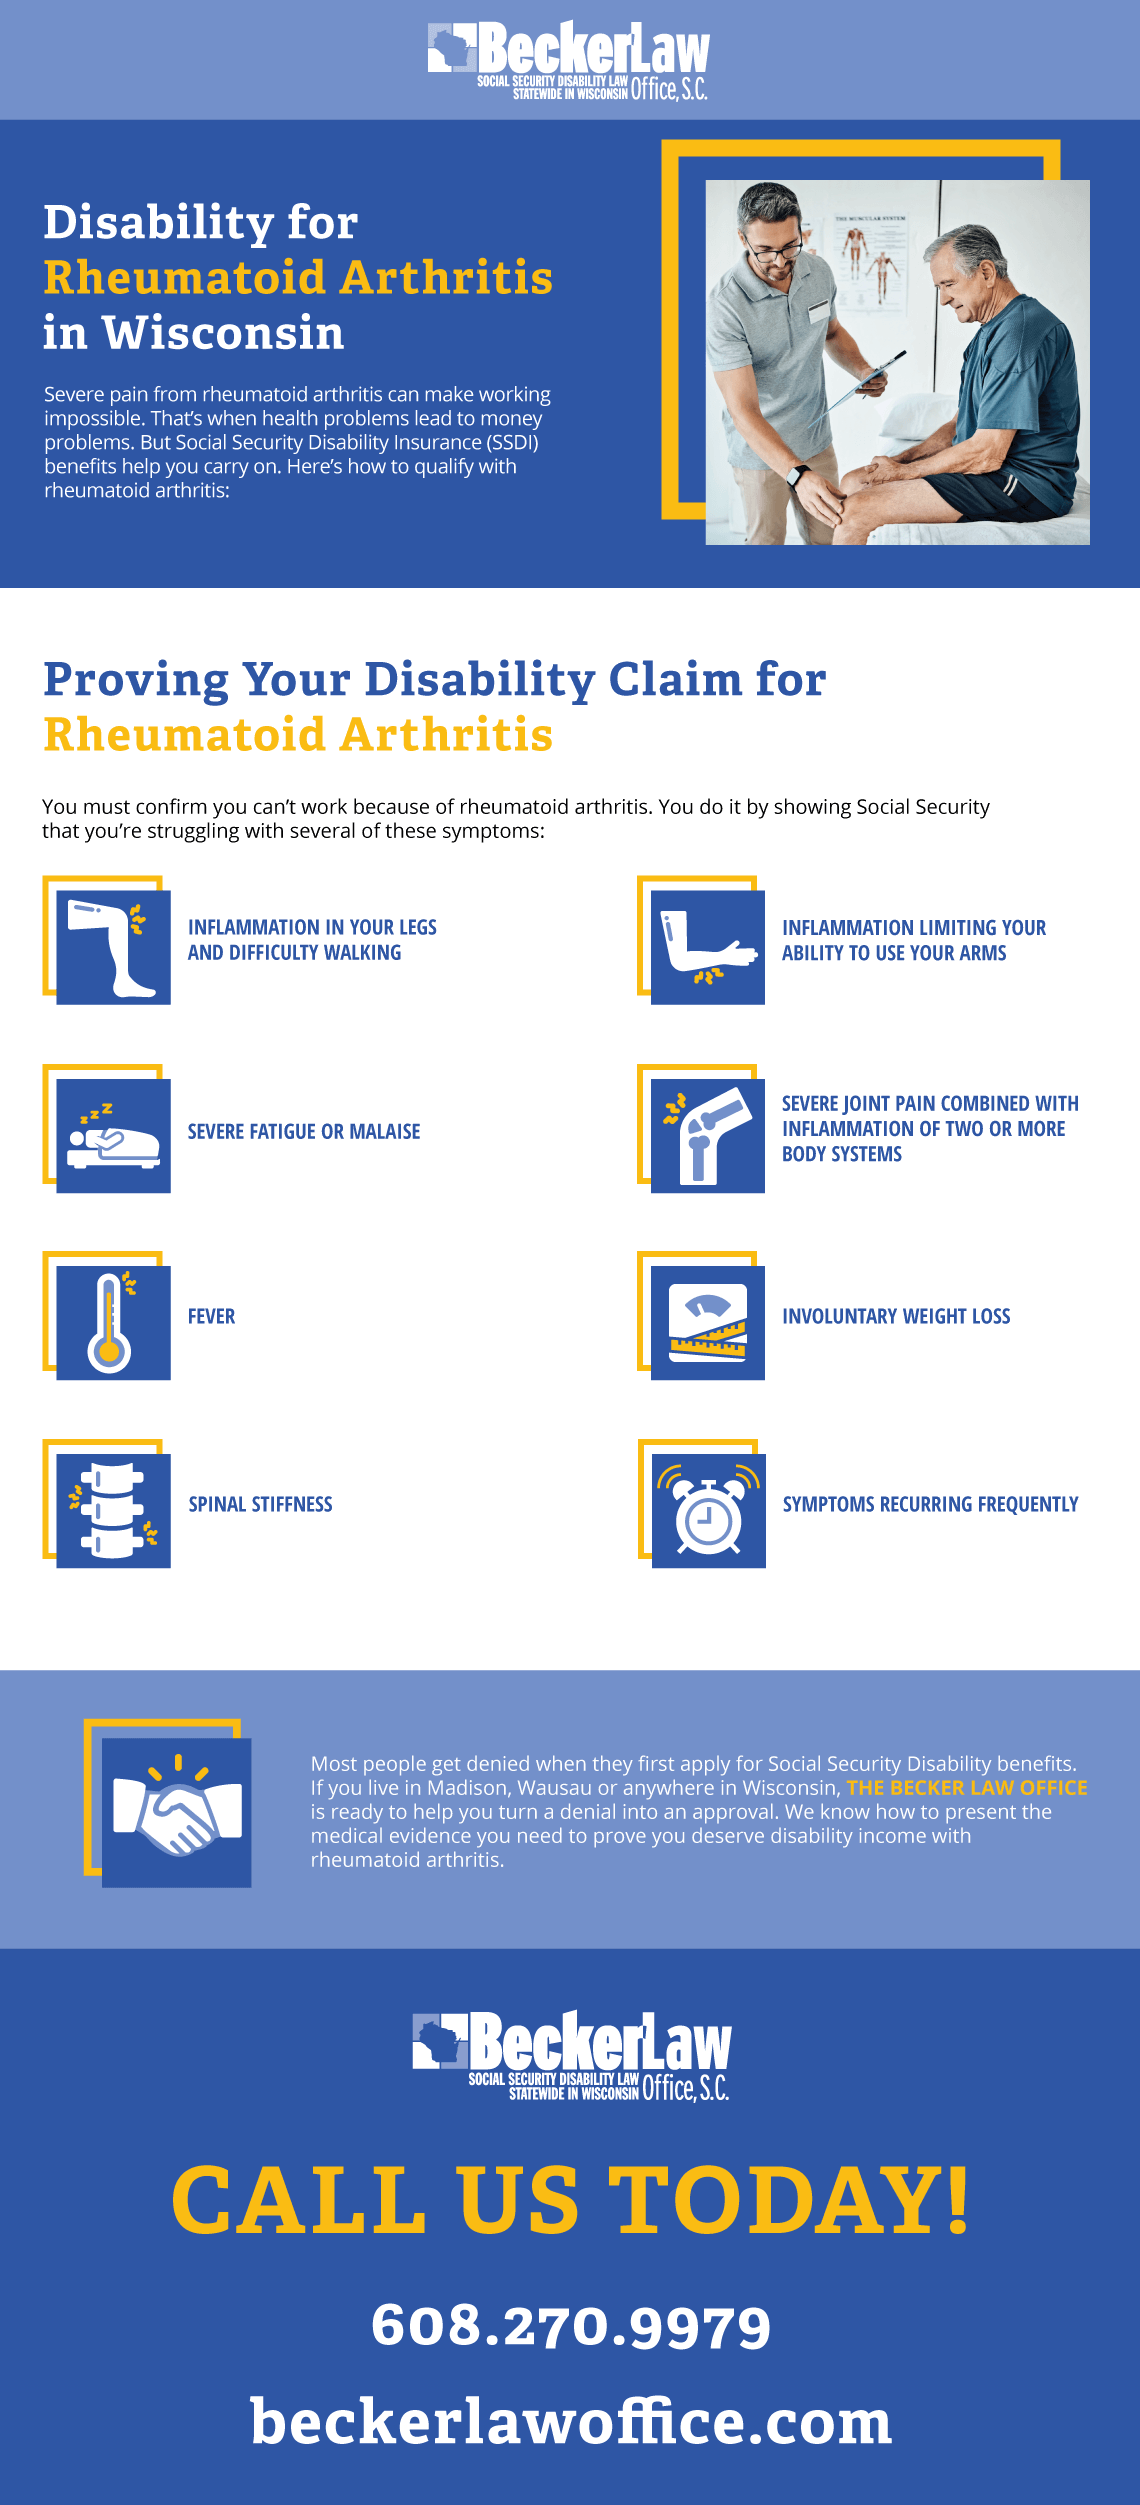 An infographic about obtaining disability benefits for rheumatoid arthritis.